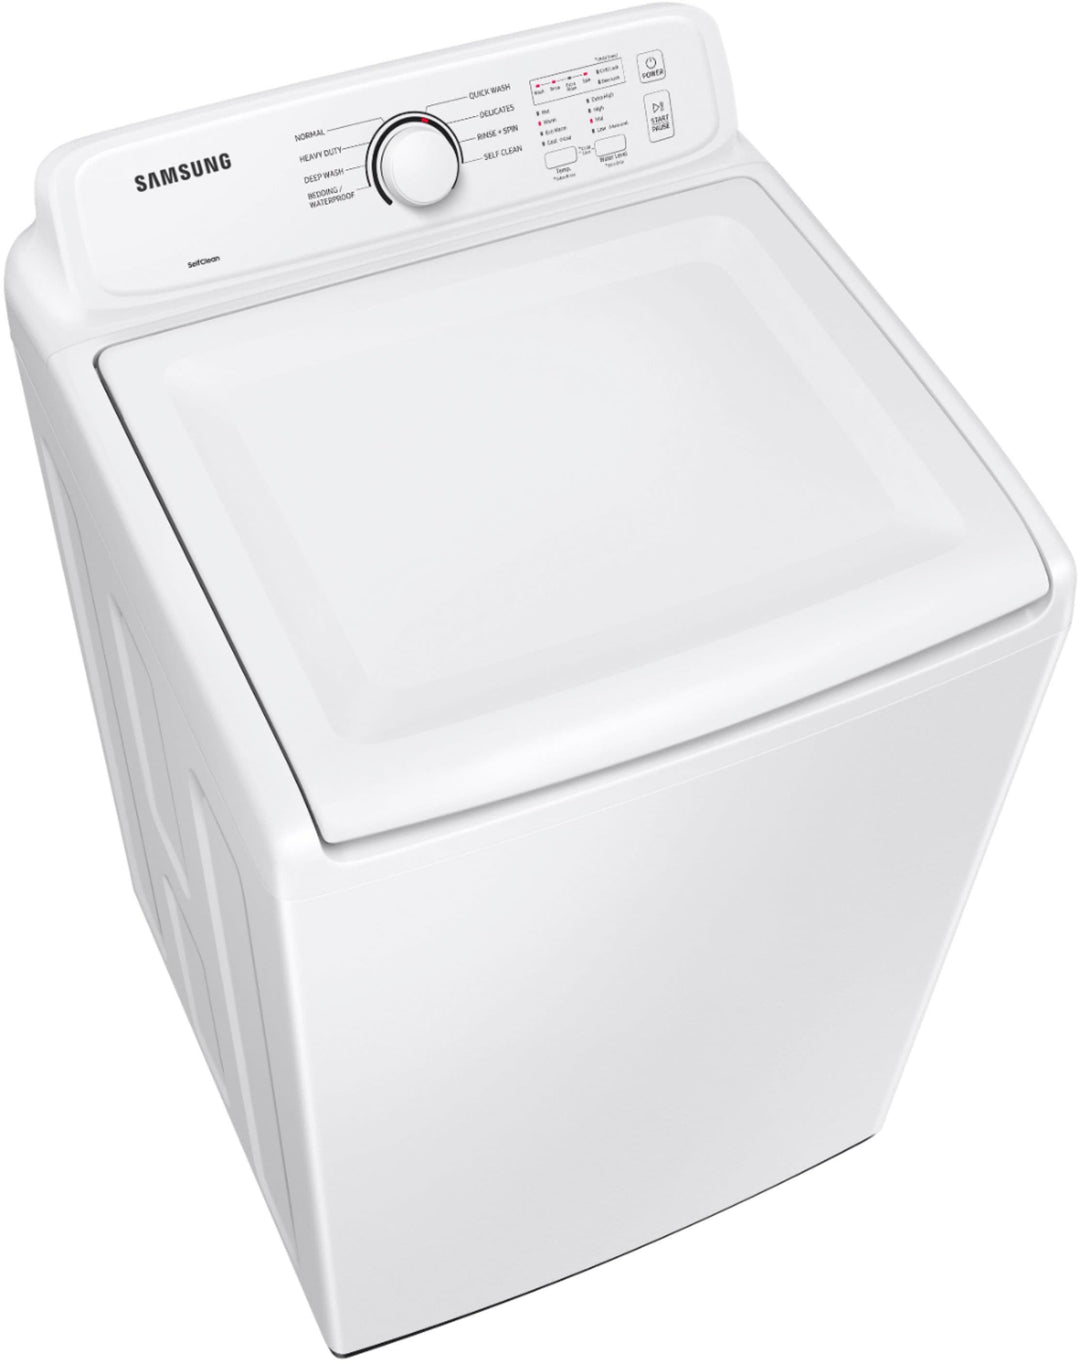 Samsung - 4.0 cu. ft. High-Efficiency Top Load Washer with ActiveWave Agitator and Soft-Close Lid - White_12